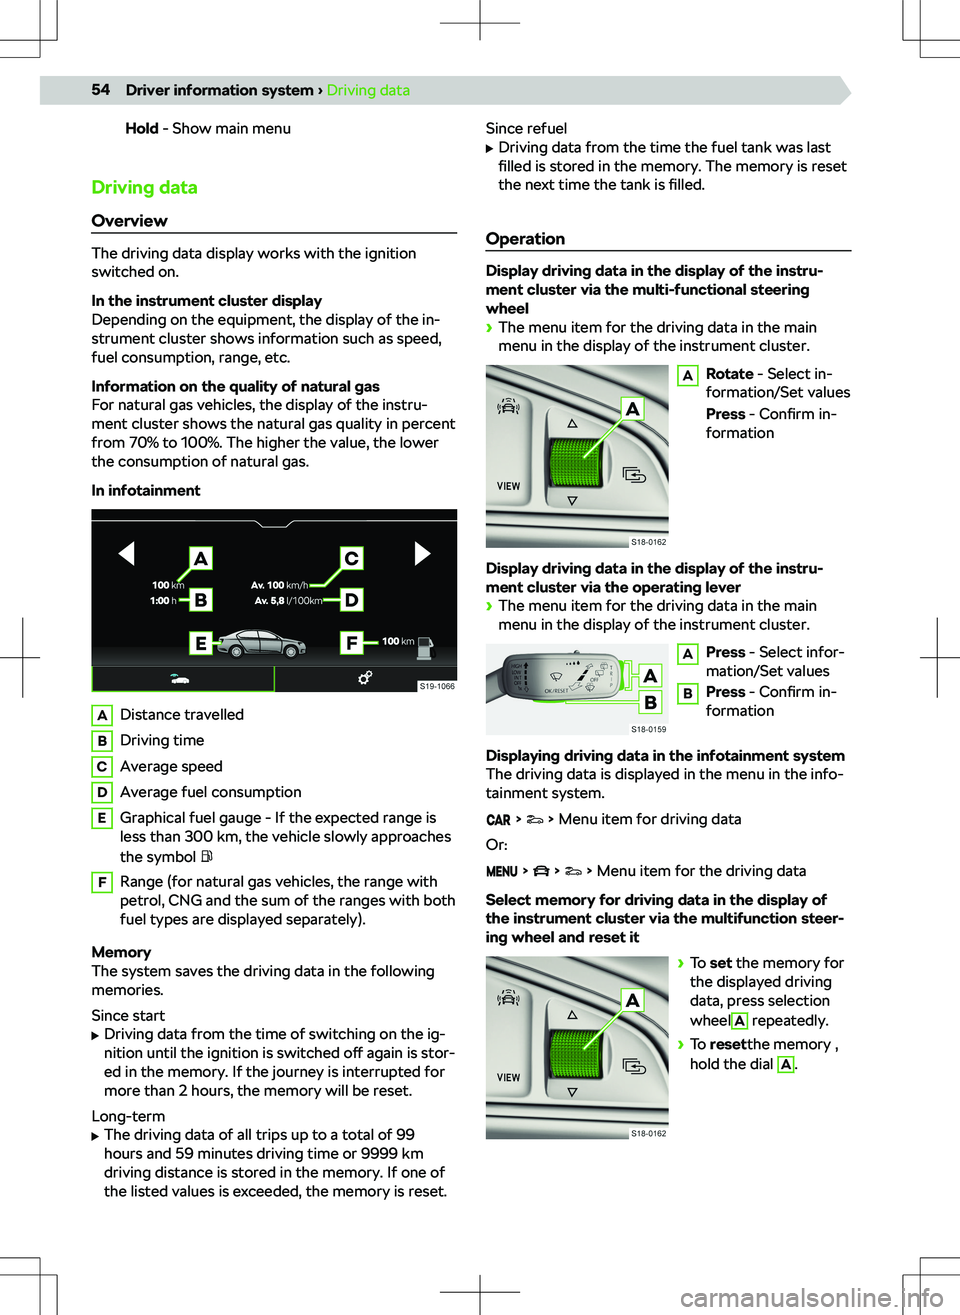 SKODA KAMIQ 2020  Owner´s Manual Hold - Show main menu
Driving data
Overview
The driving data display works with the ignition
switched on.
In the instrument cluster display
Depending on the equipment, the display of the in-
strument 